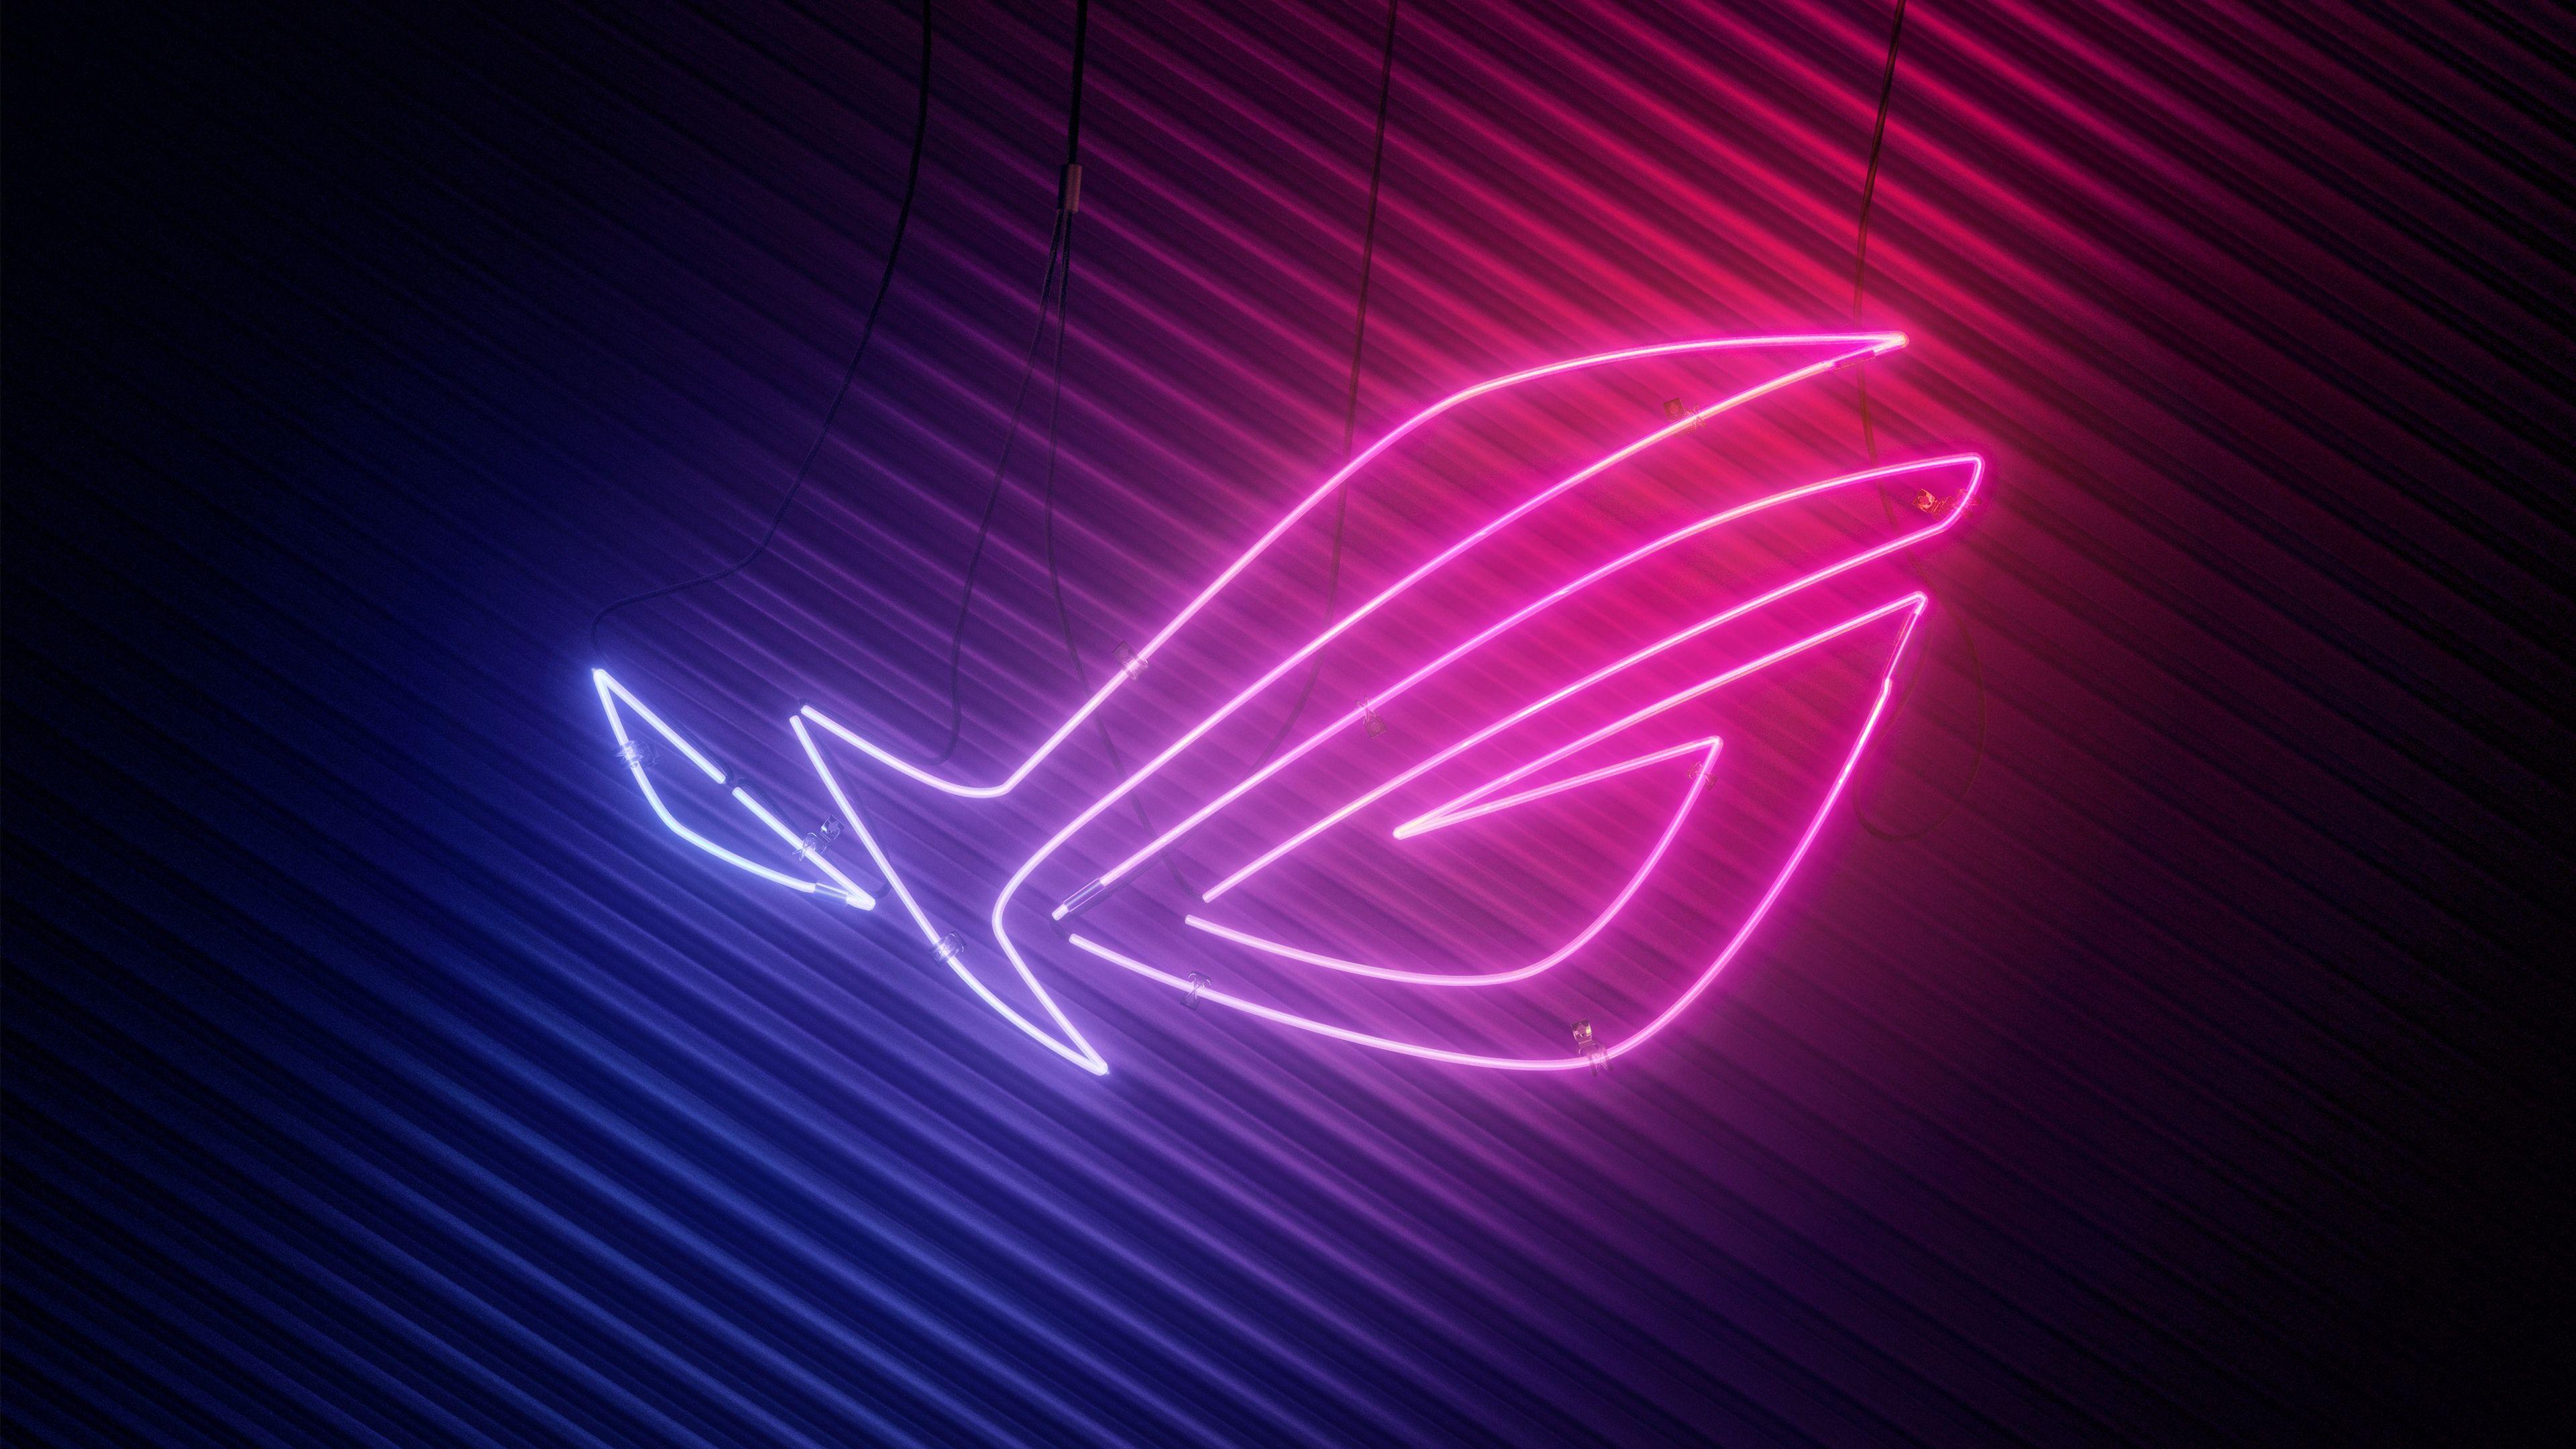 Asus Rog Pc Wallpapers Top Free Asus Rog Pc Backgrounds Wallpaperaccess